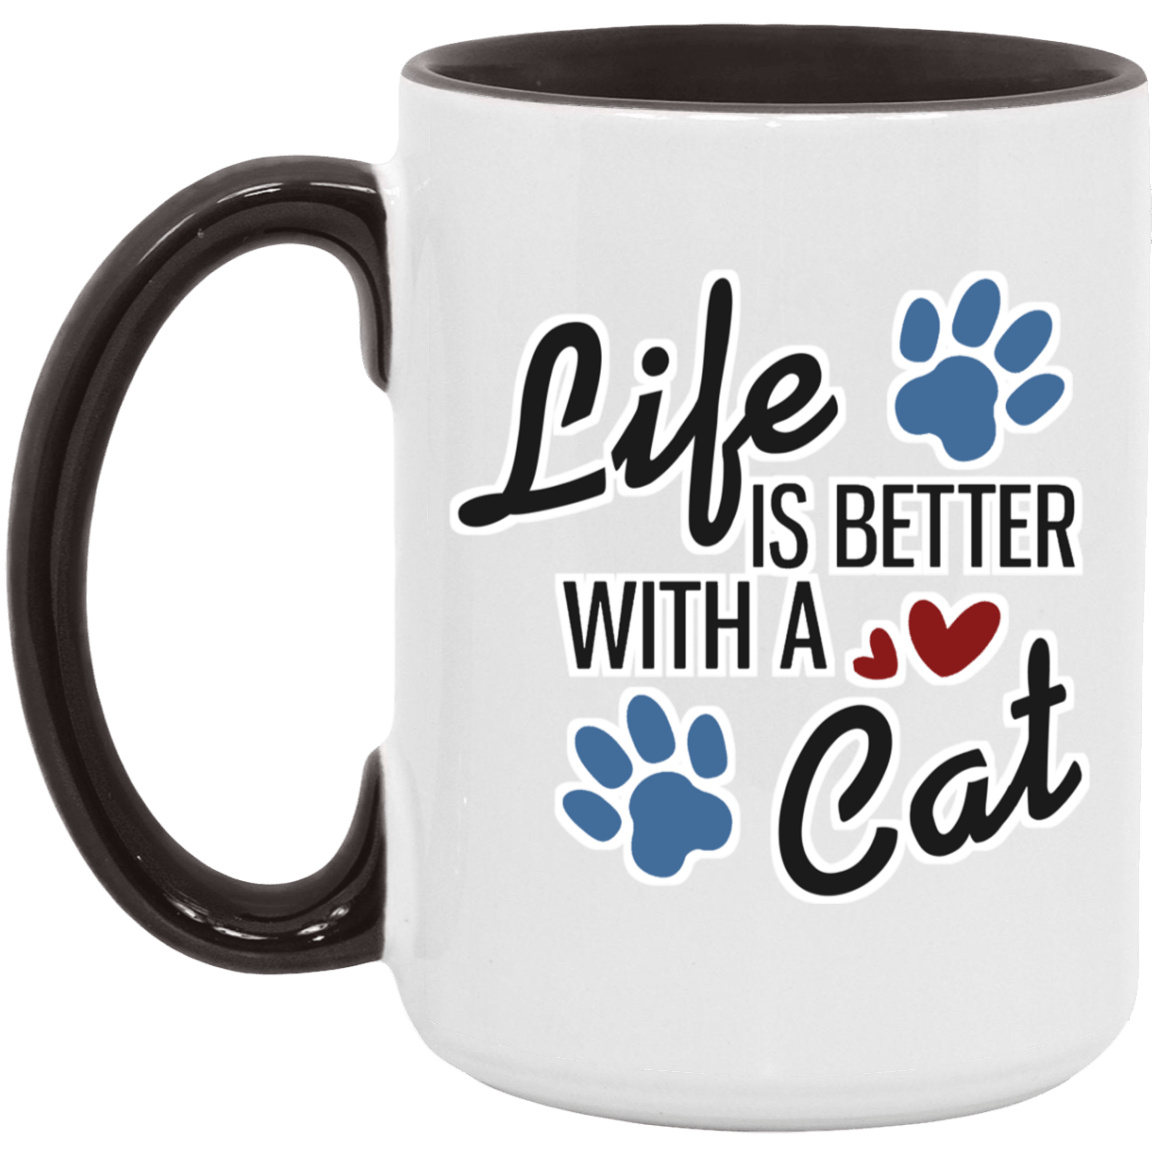 Life is Better with a Cat - Mugs.